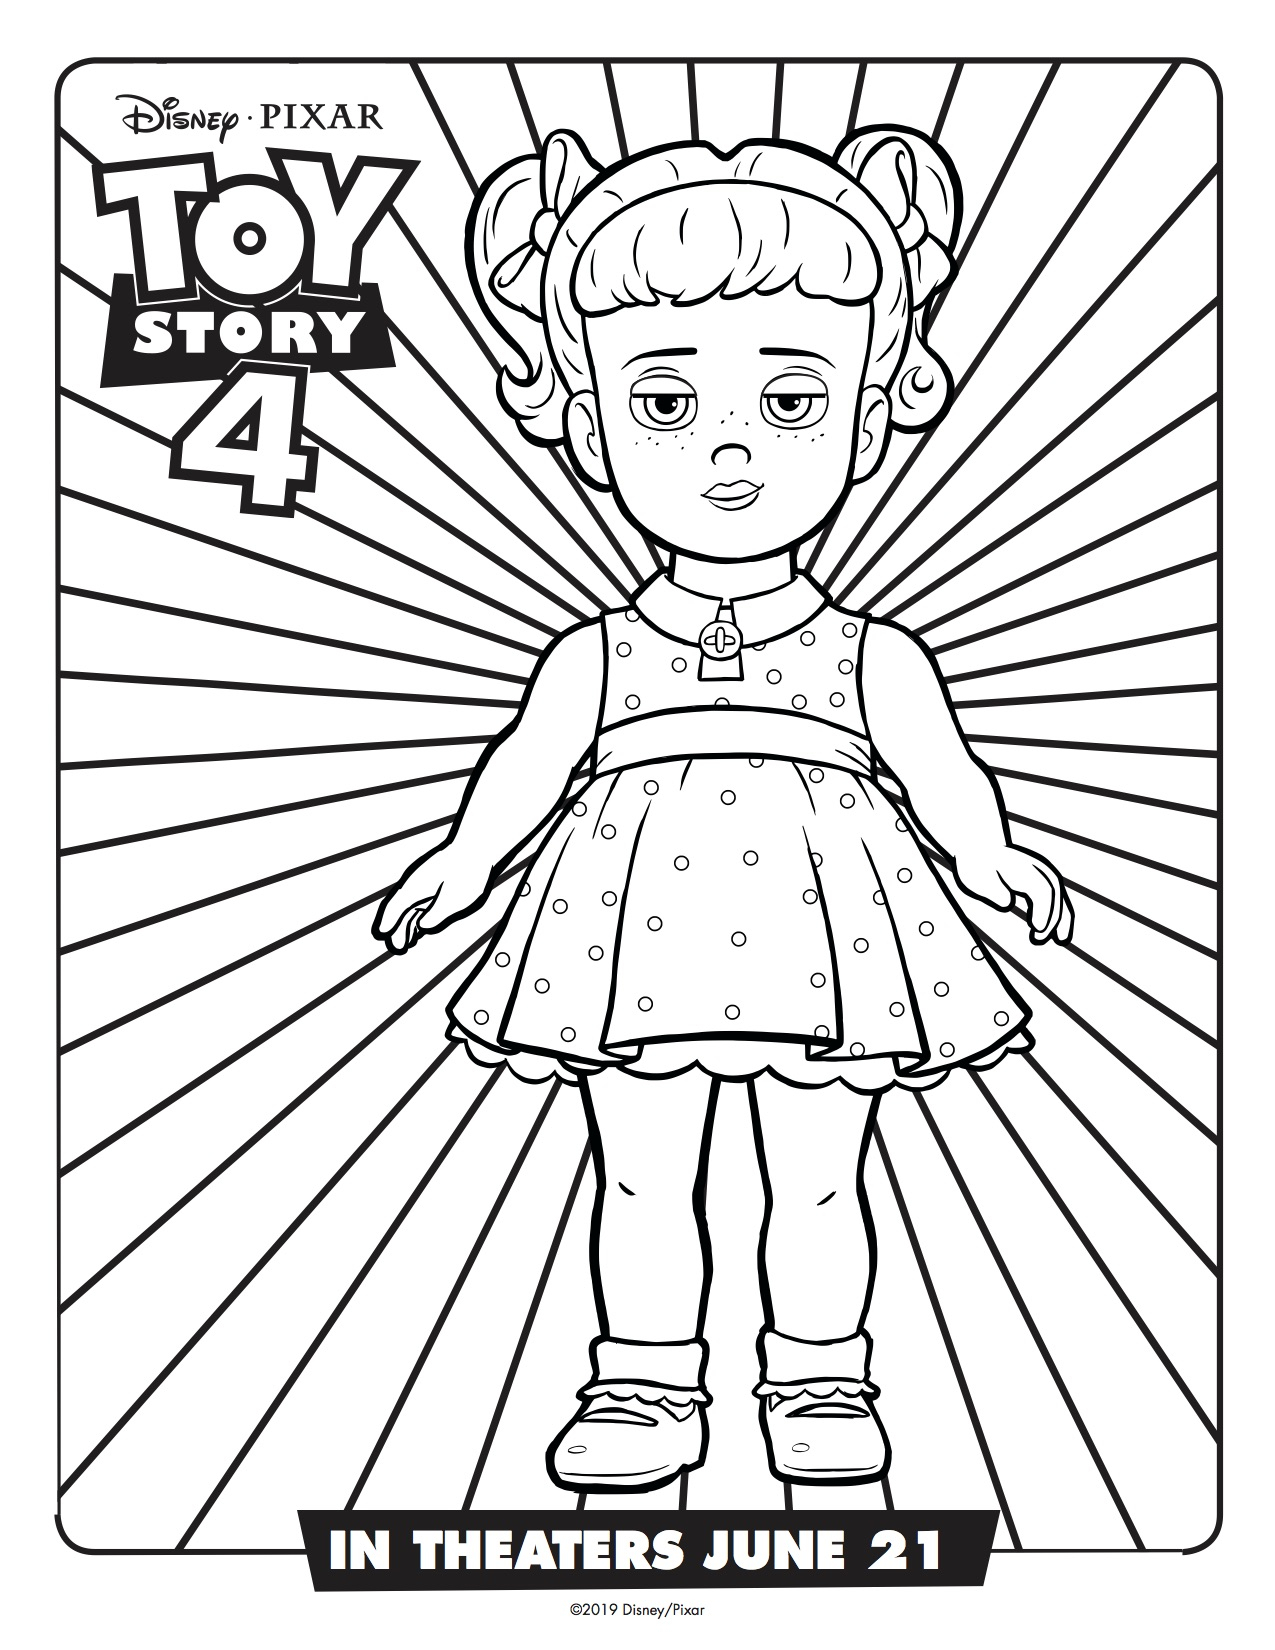 Story Coloring Pages Toy Story 4 Gab Gab Printable Coloring Page Simply Sweet Days